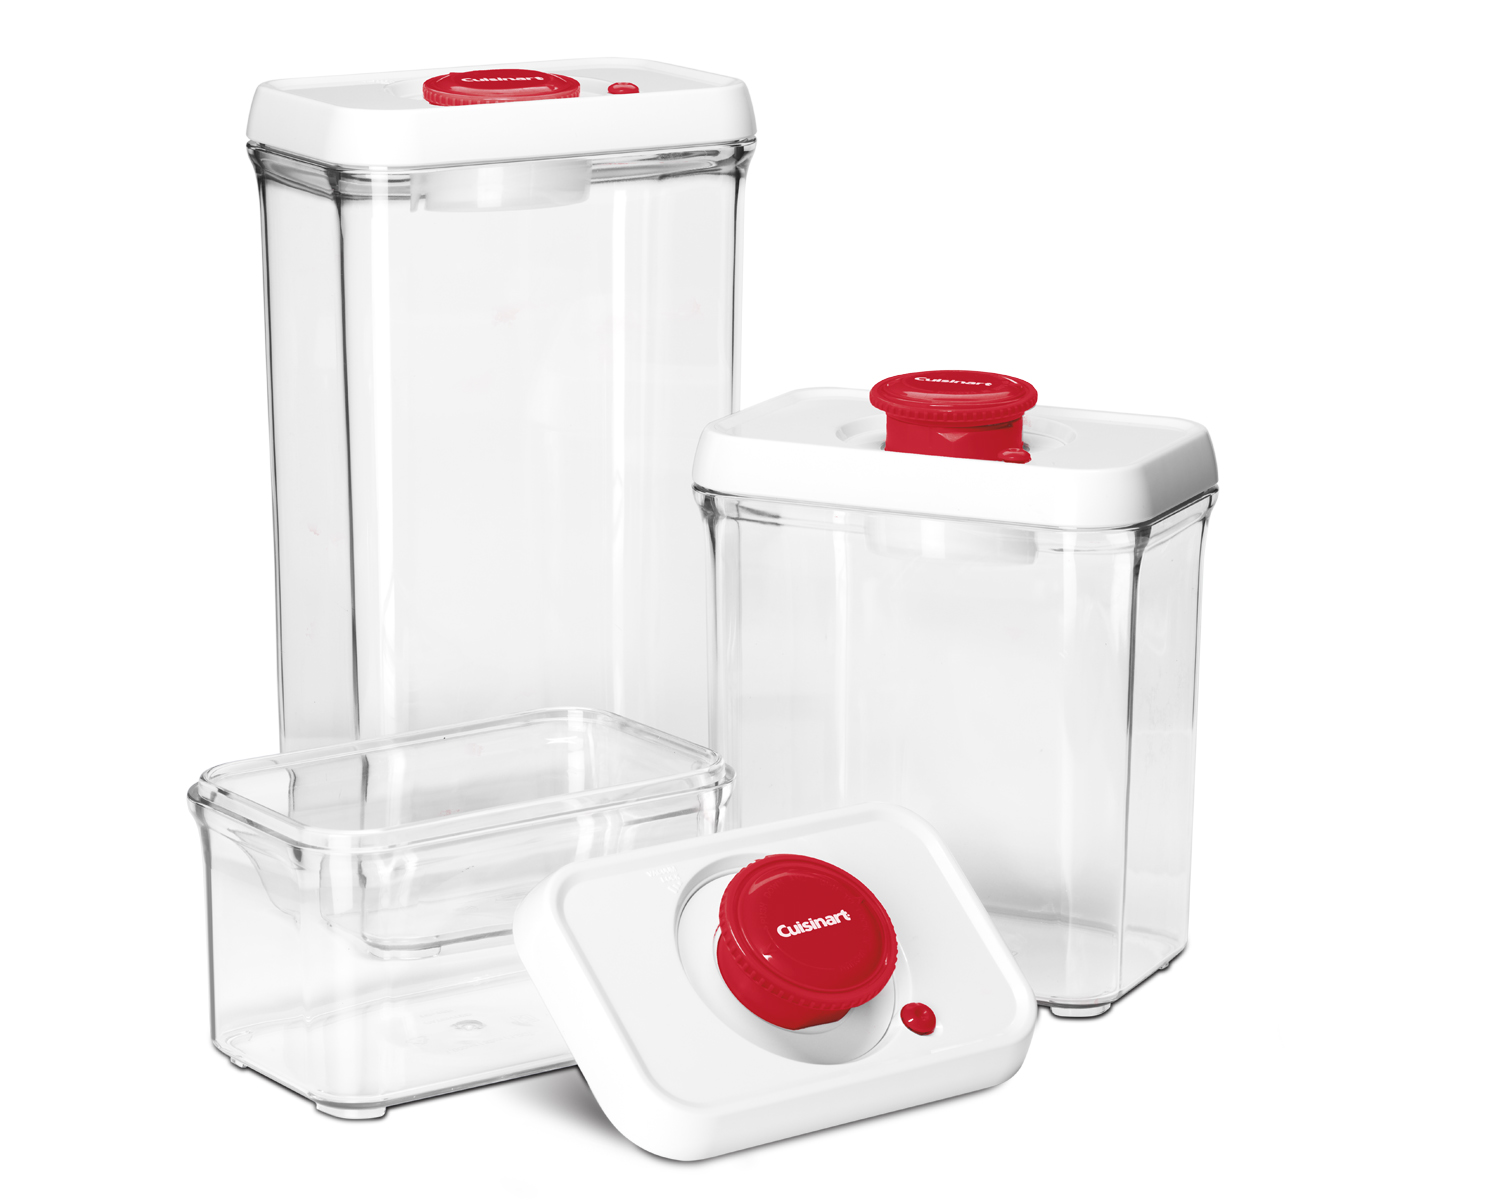 Cuisinart CFS-TC-S6R FreshEdge Vacuum-Seal Food Storage System, 6 pc, Red